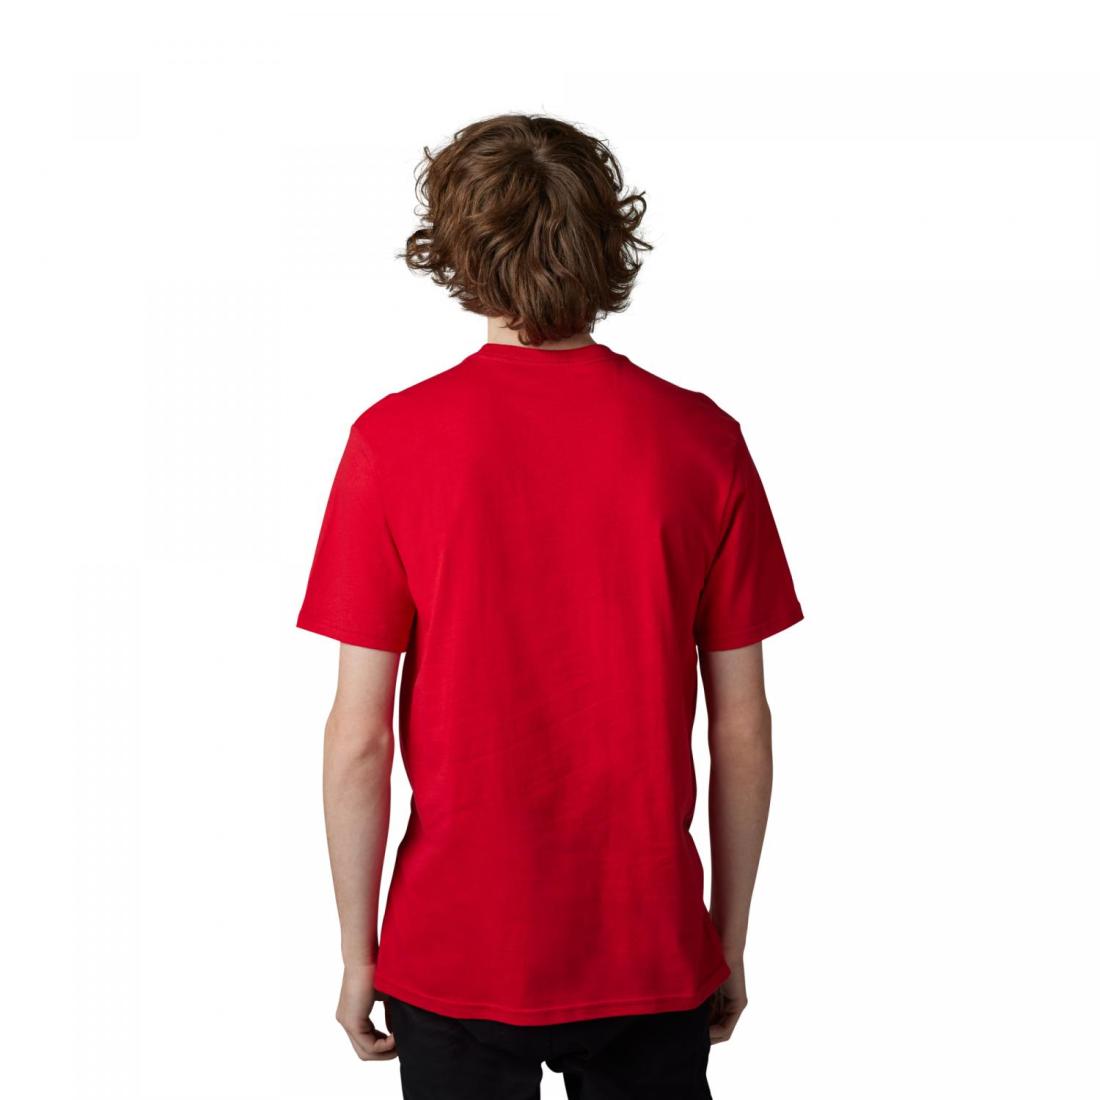 Absolute Ss Prem Tee Flame Red